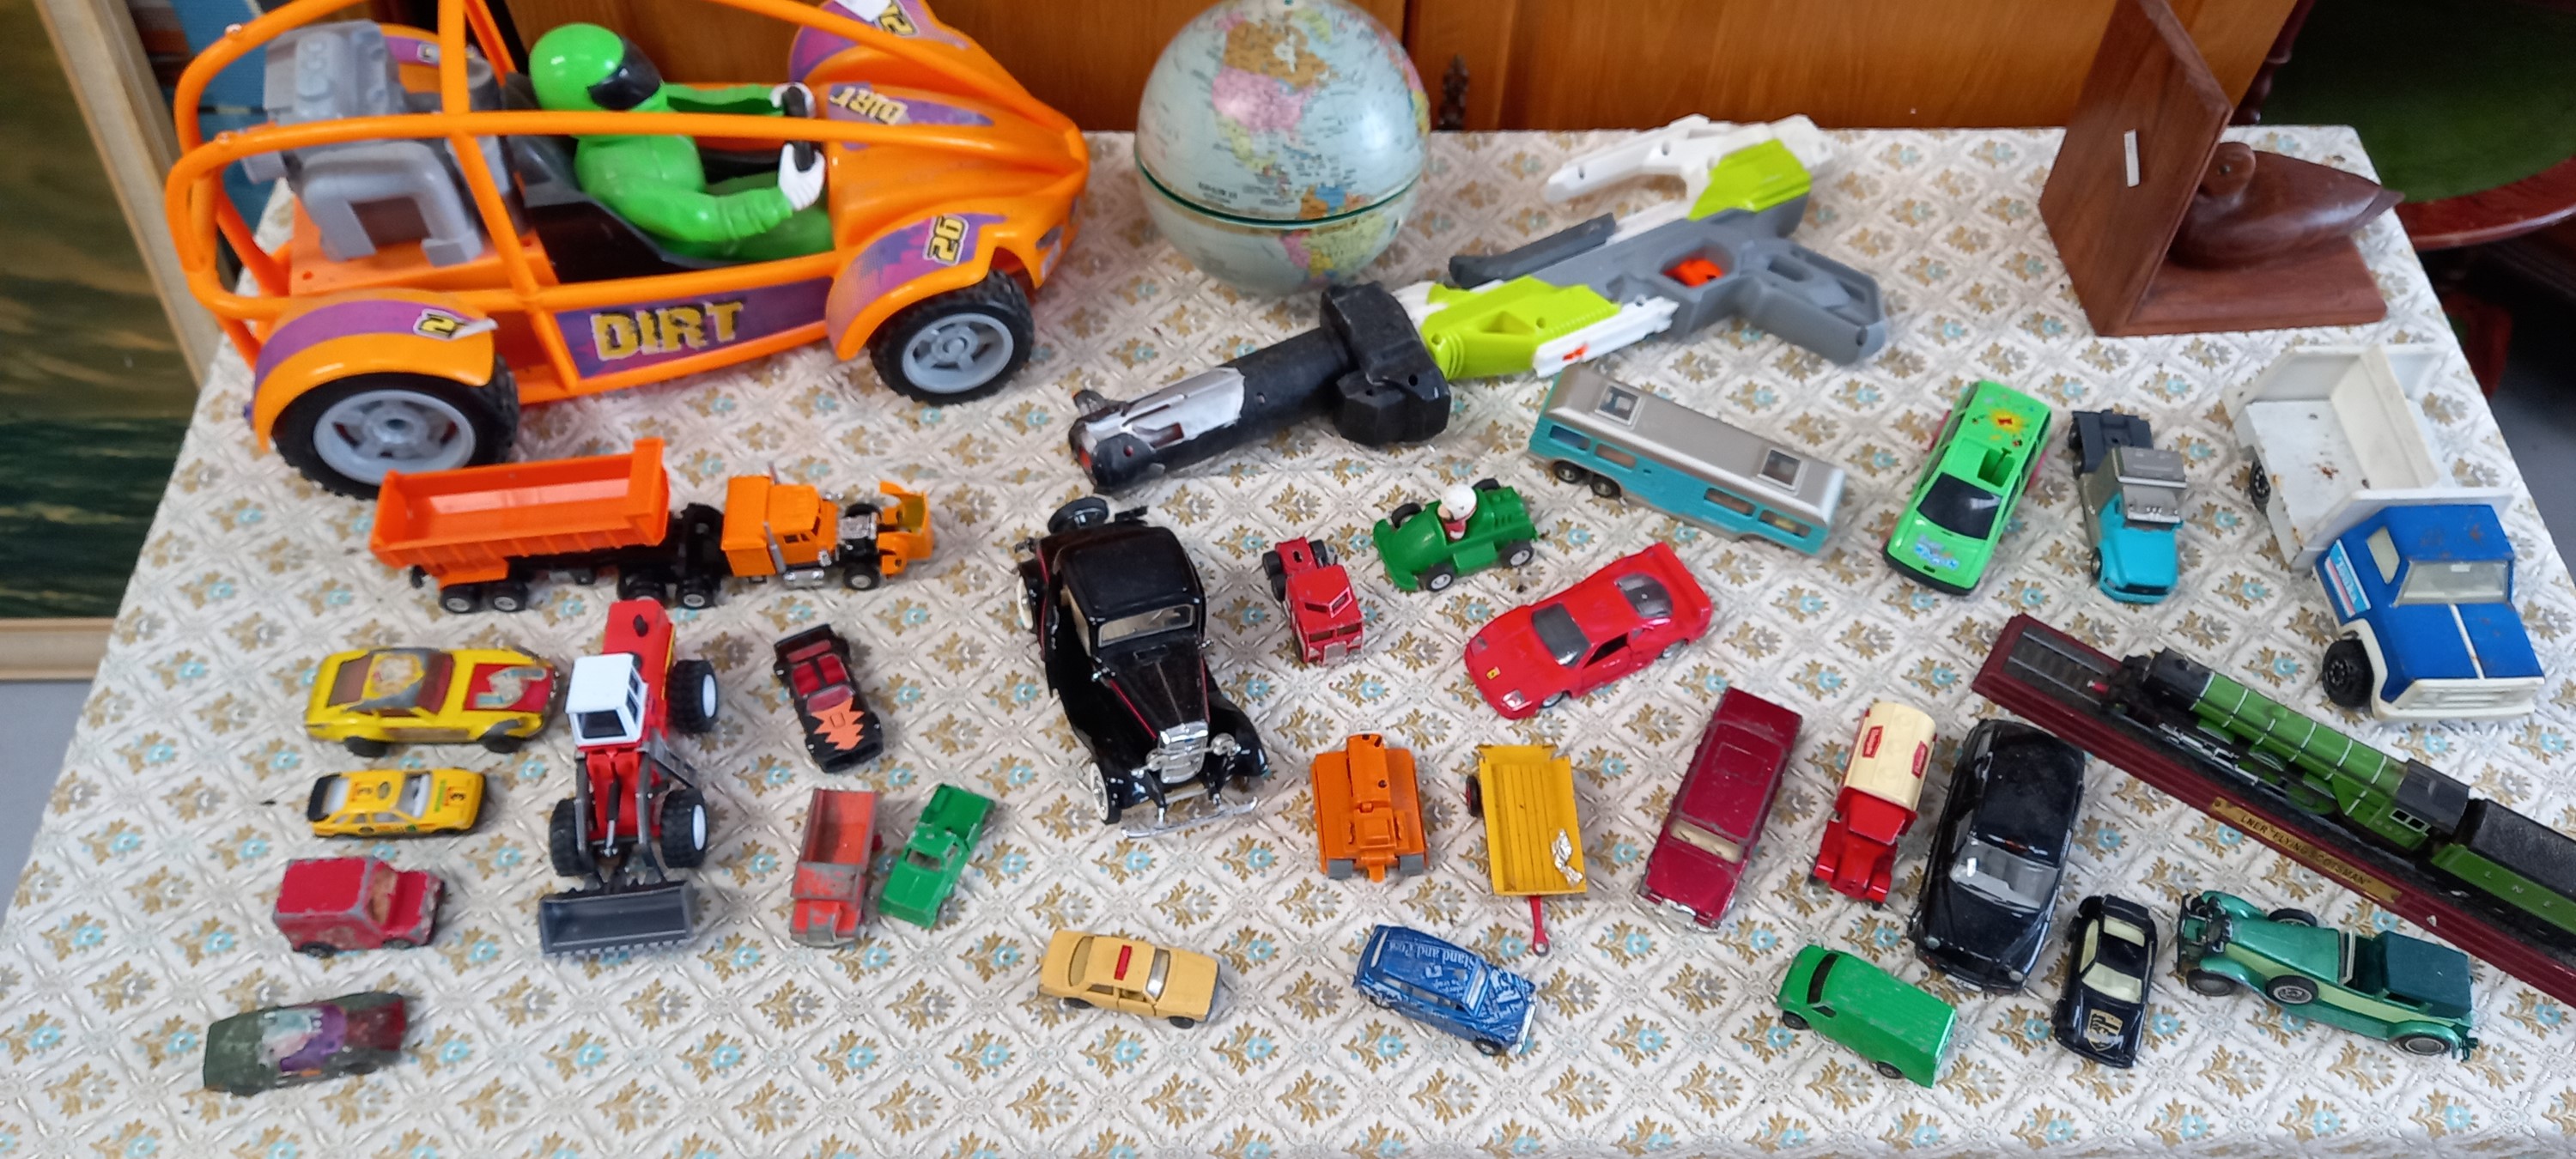 Corgi, Matchbox and other cars and toys in one box. - Image 3 of 4